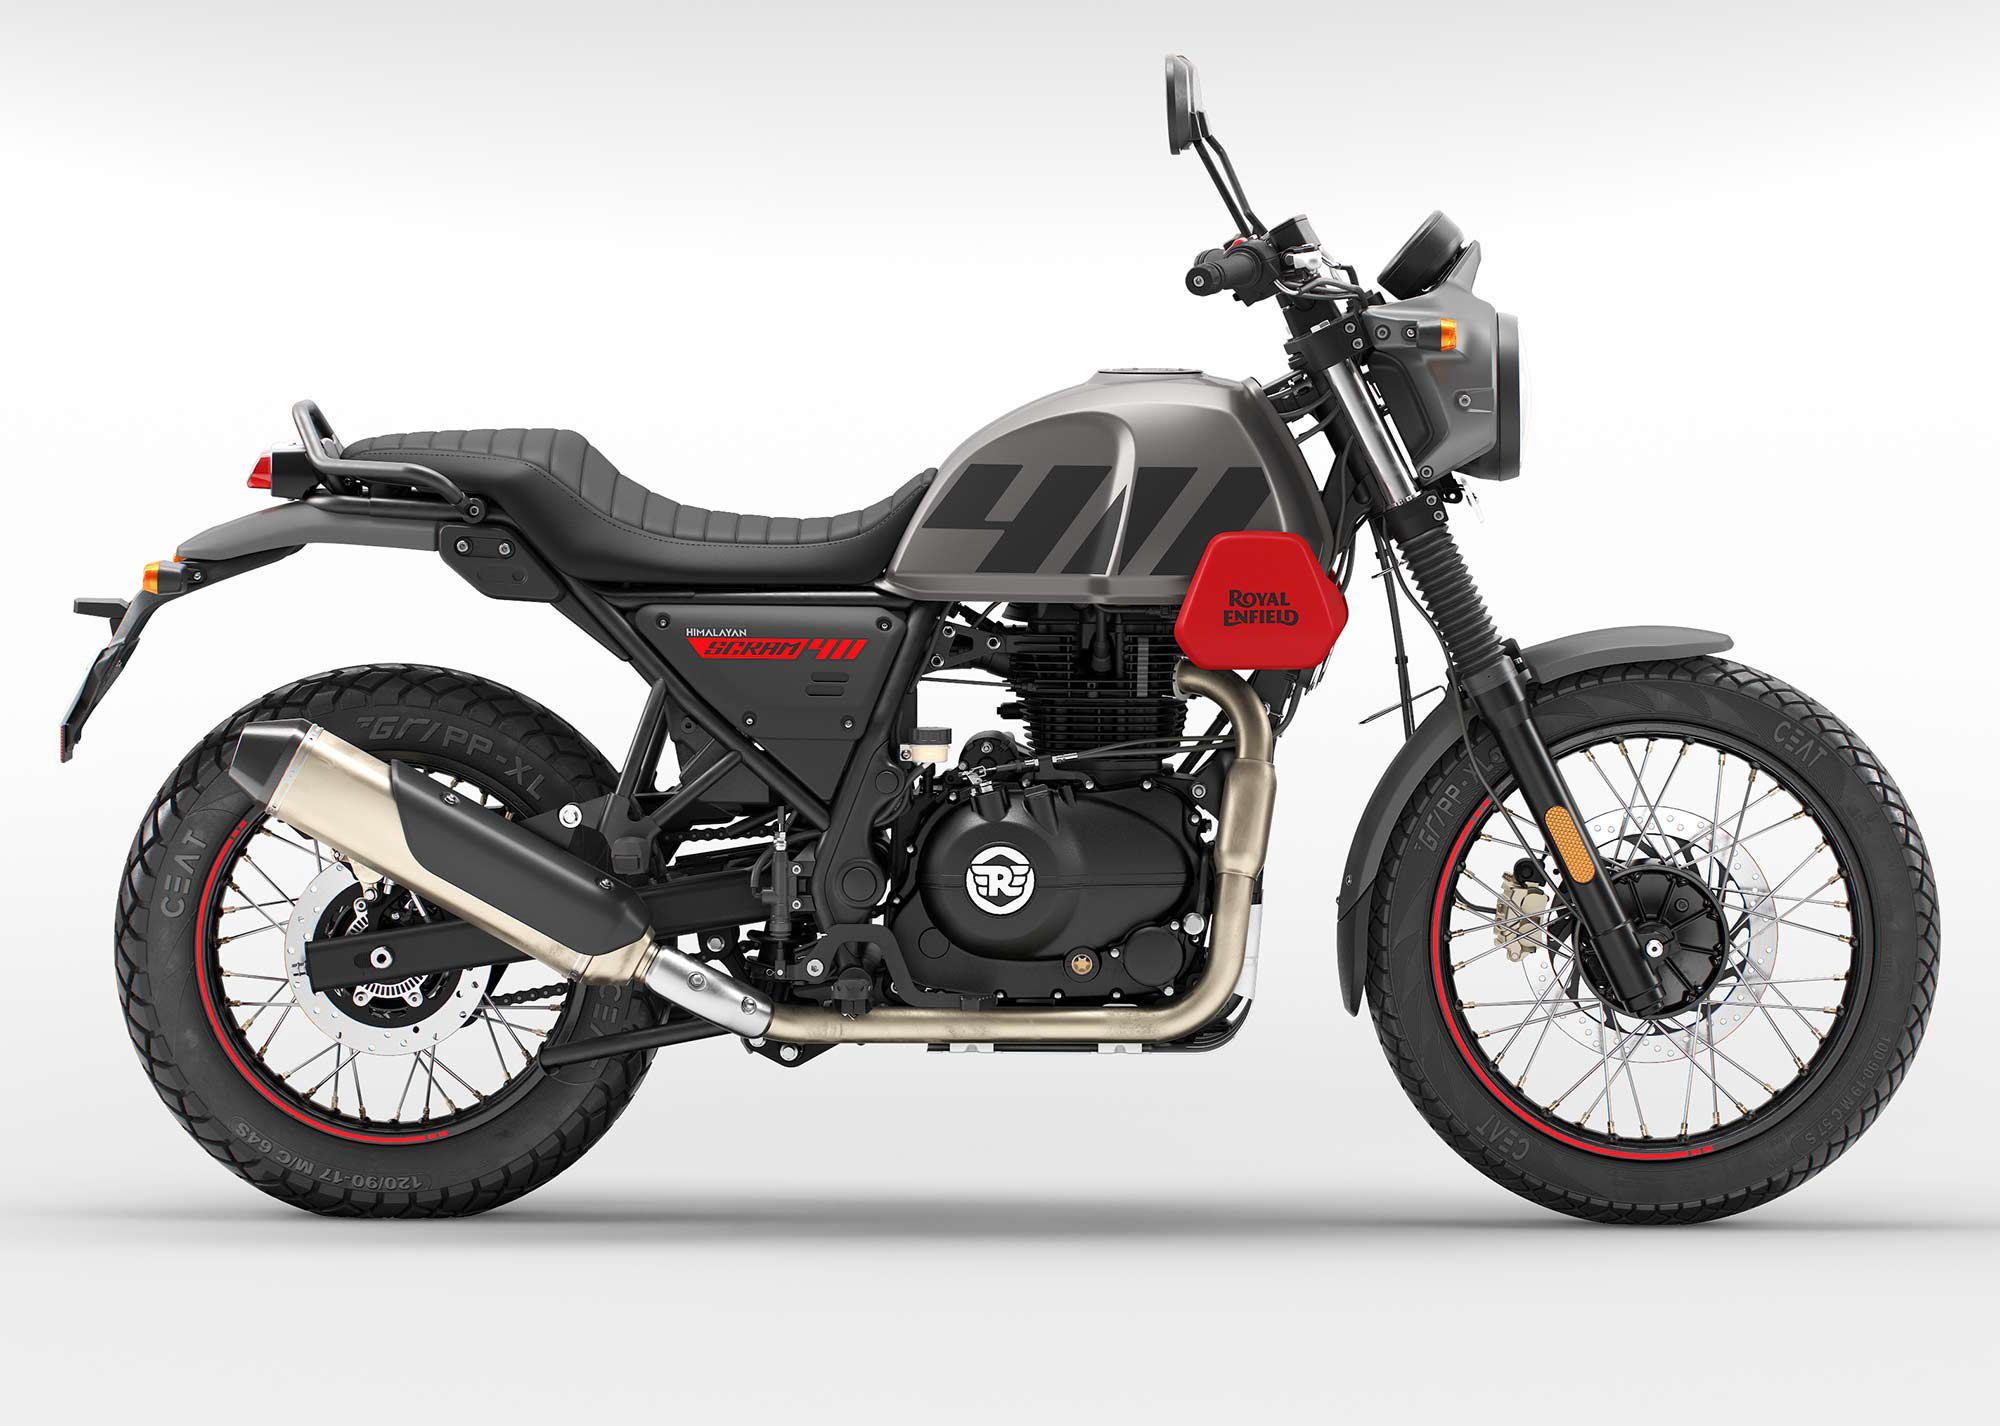 Drawing on the Himalayan’s strengths, the Scram 411 is an urban scrambler.